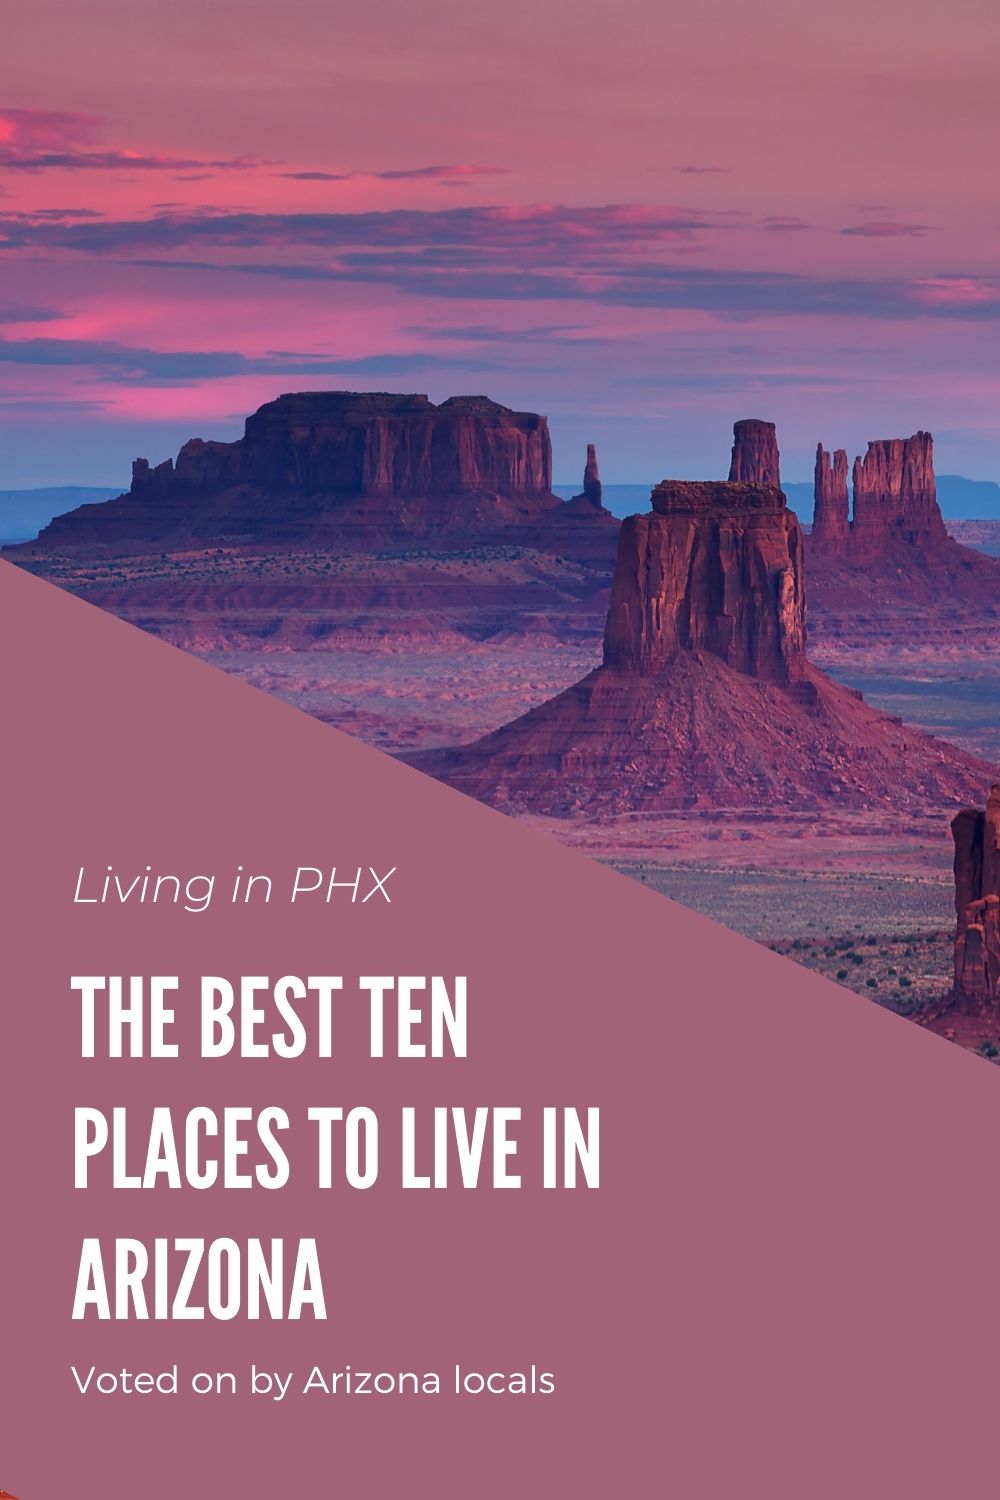 Best Places to Live in Arizona, Living in Phoenix real estate